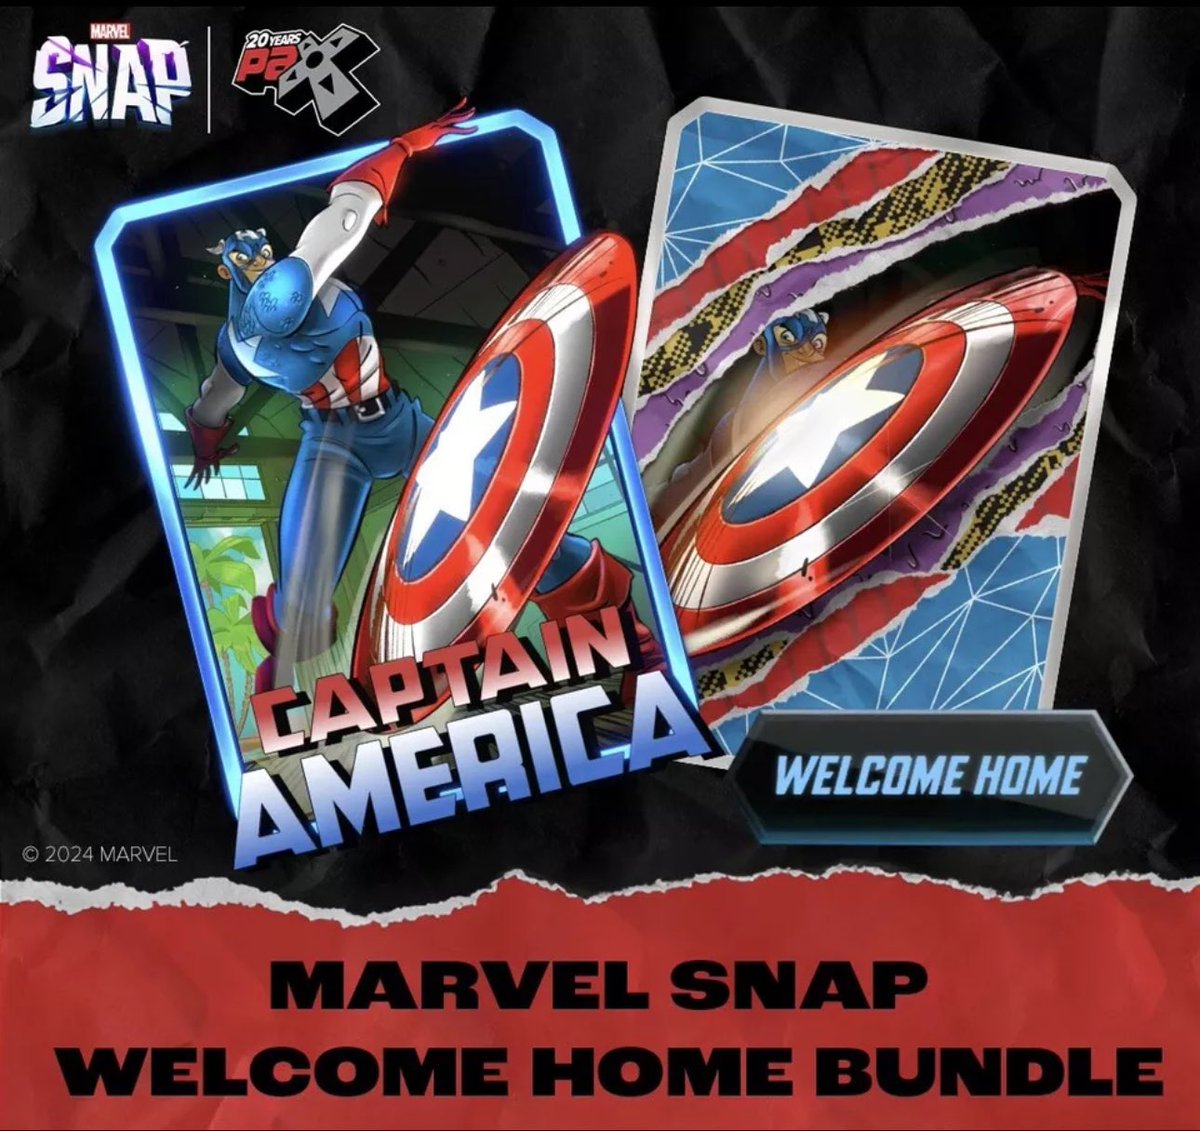 🚨 Giveaway 🚨 Marvel Snap Welcome Home Bundle from Pax! To enter: 1. Follow me 2. Like and retweet 3. Comment with your favorite card/variant in snap! Winner will be chosen randomly at 4 PM EST on Sunday 3/24. Good luck everyone!